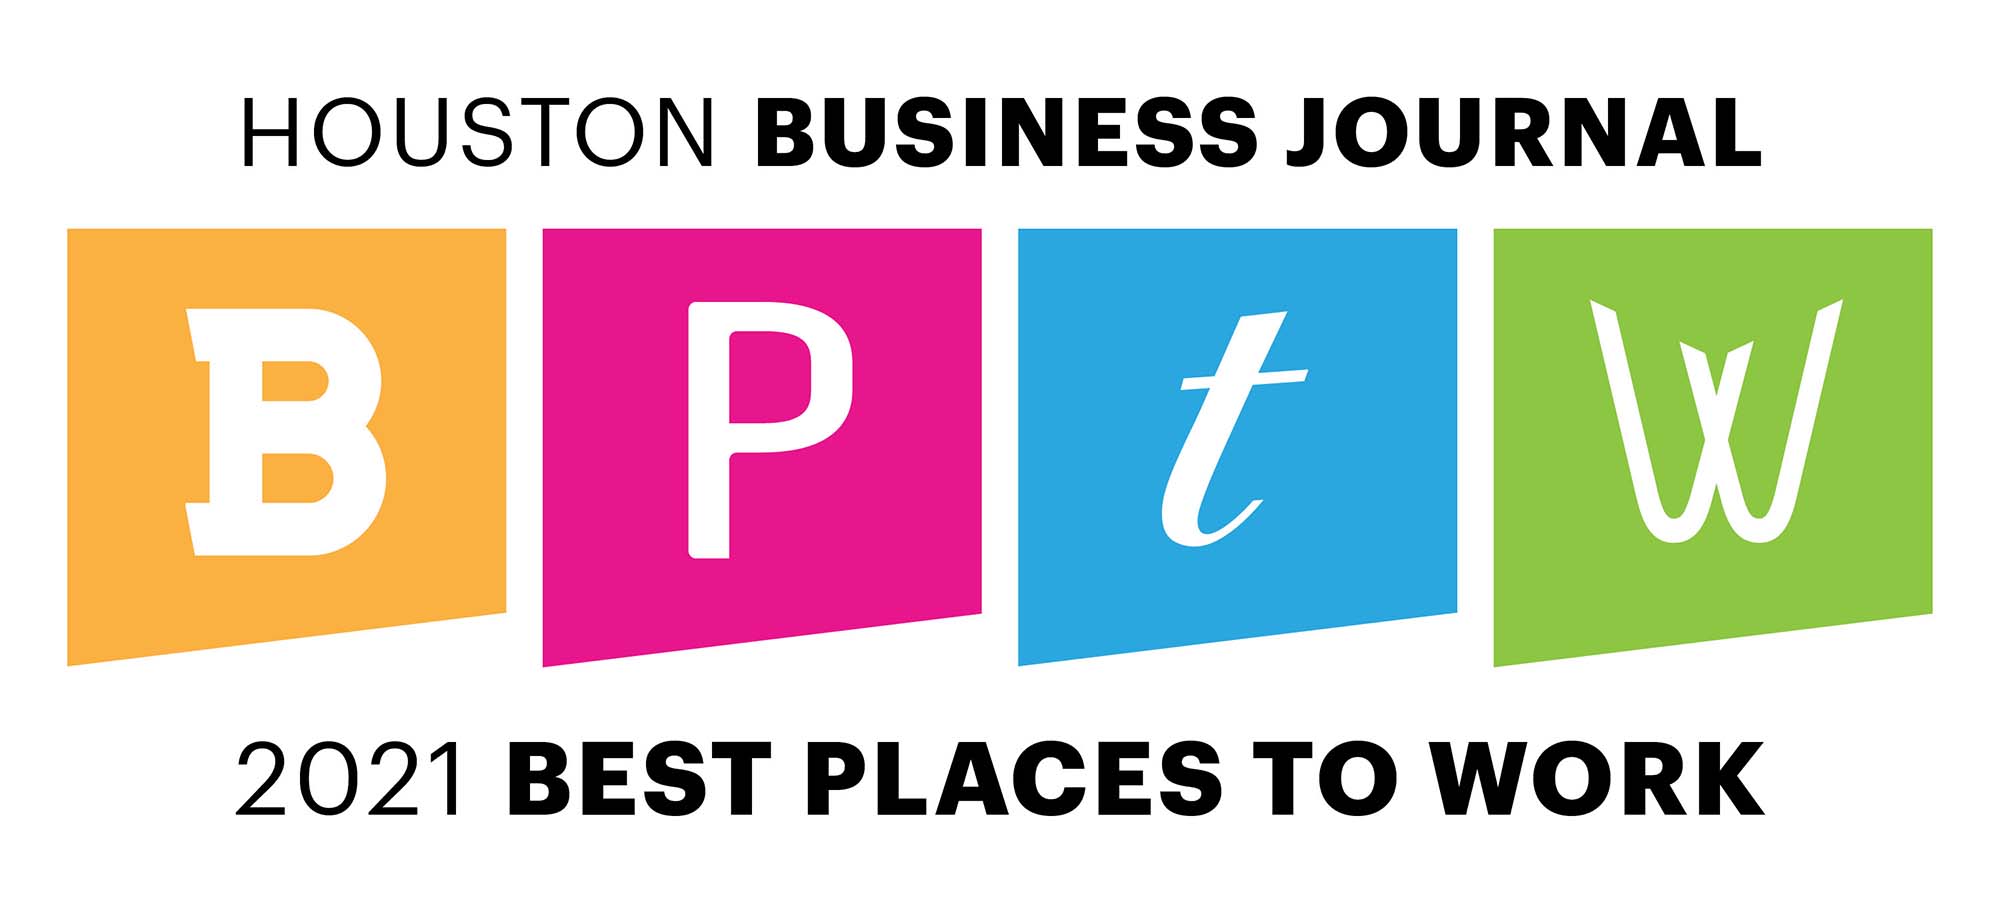 Houston Business Journal 2021 Best Places to Work